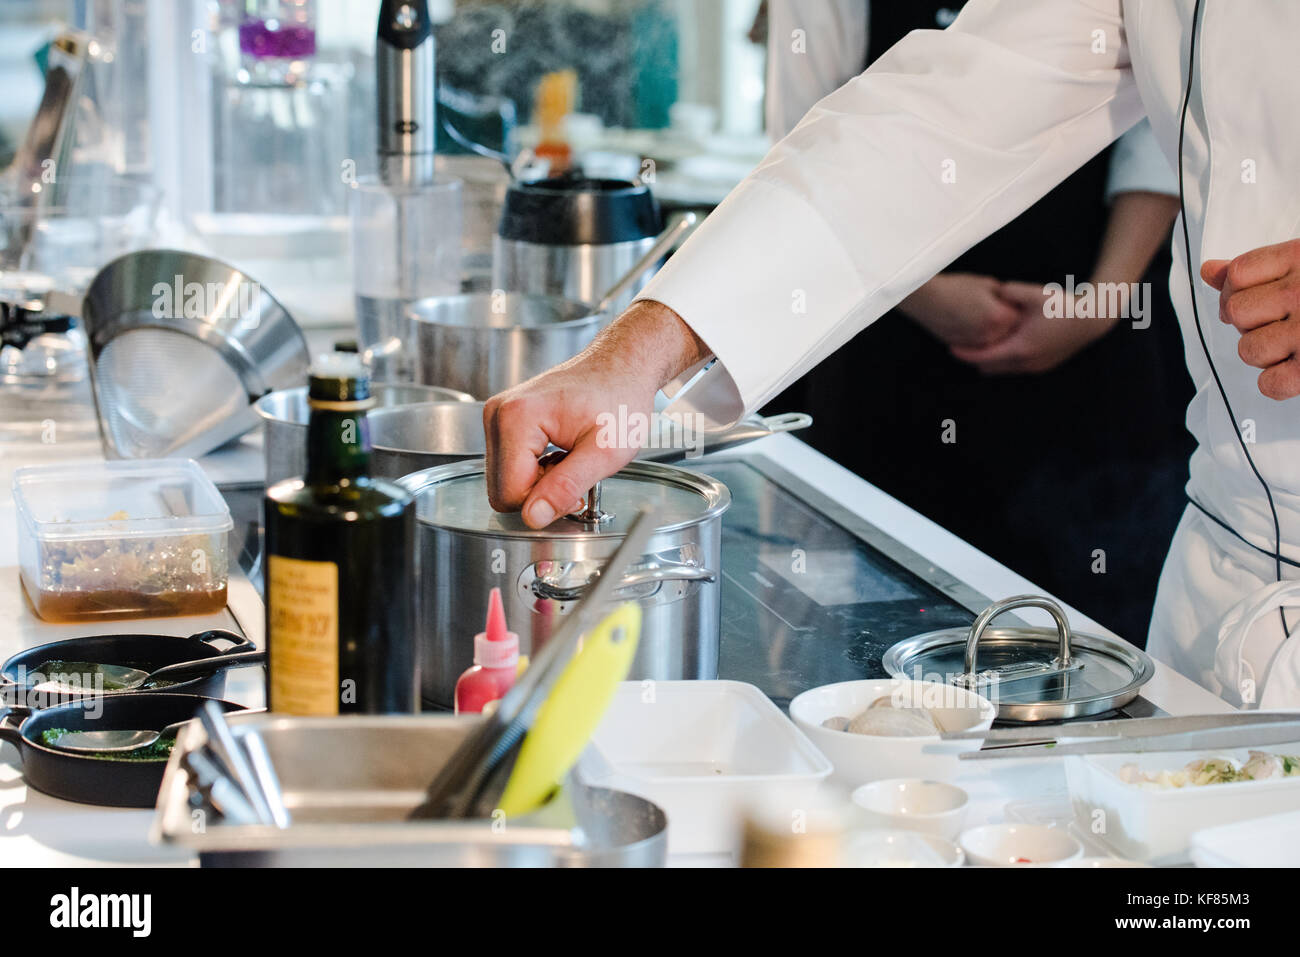 Gourmet food being prepped by World Class Chefs Stock Photo